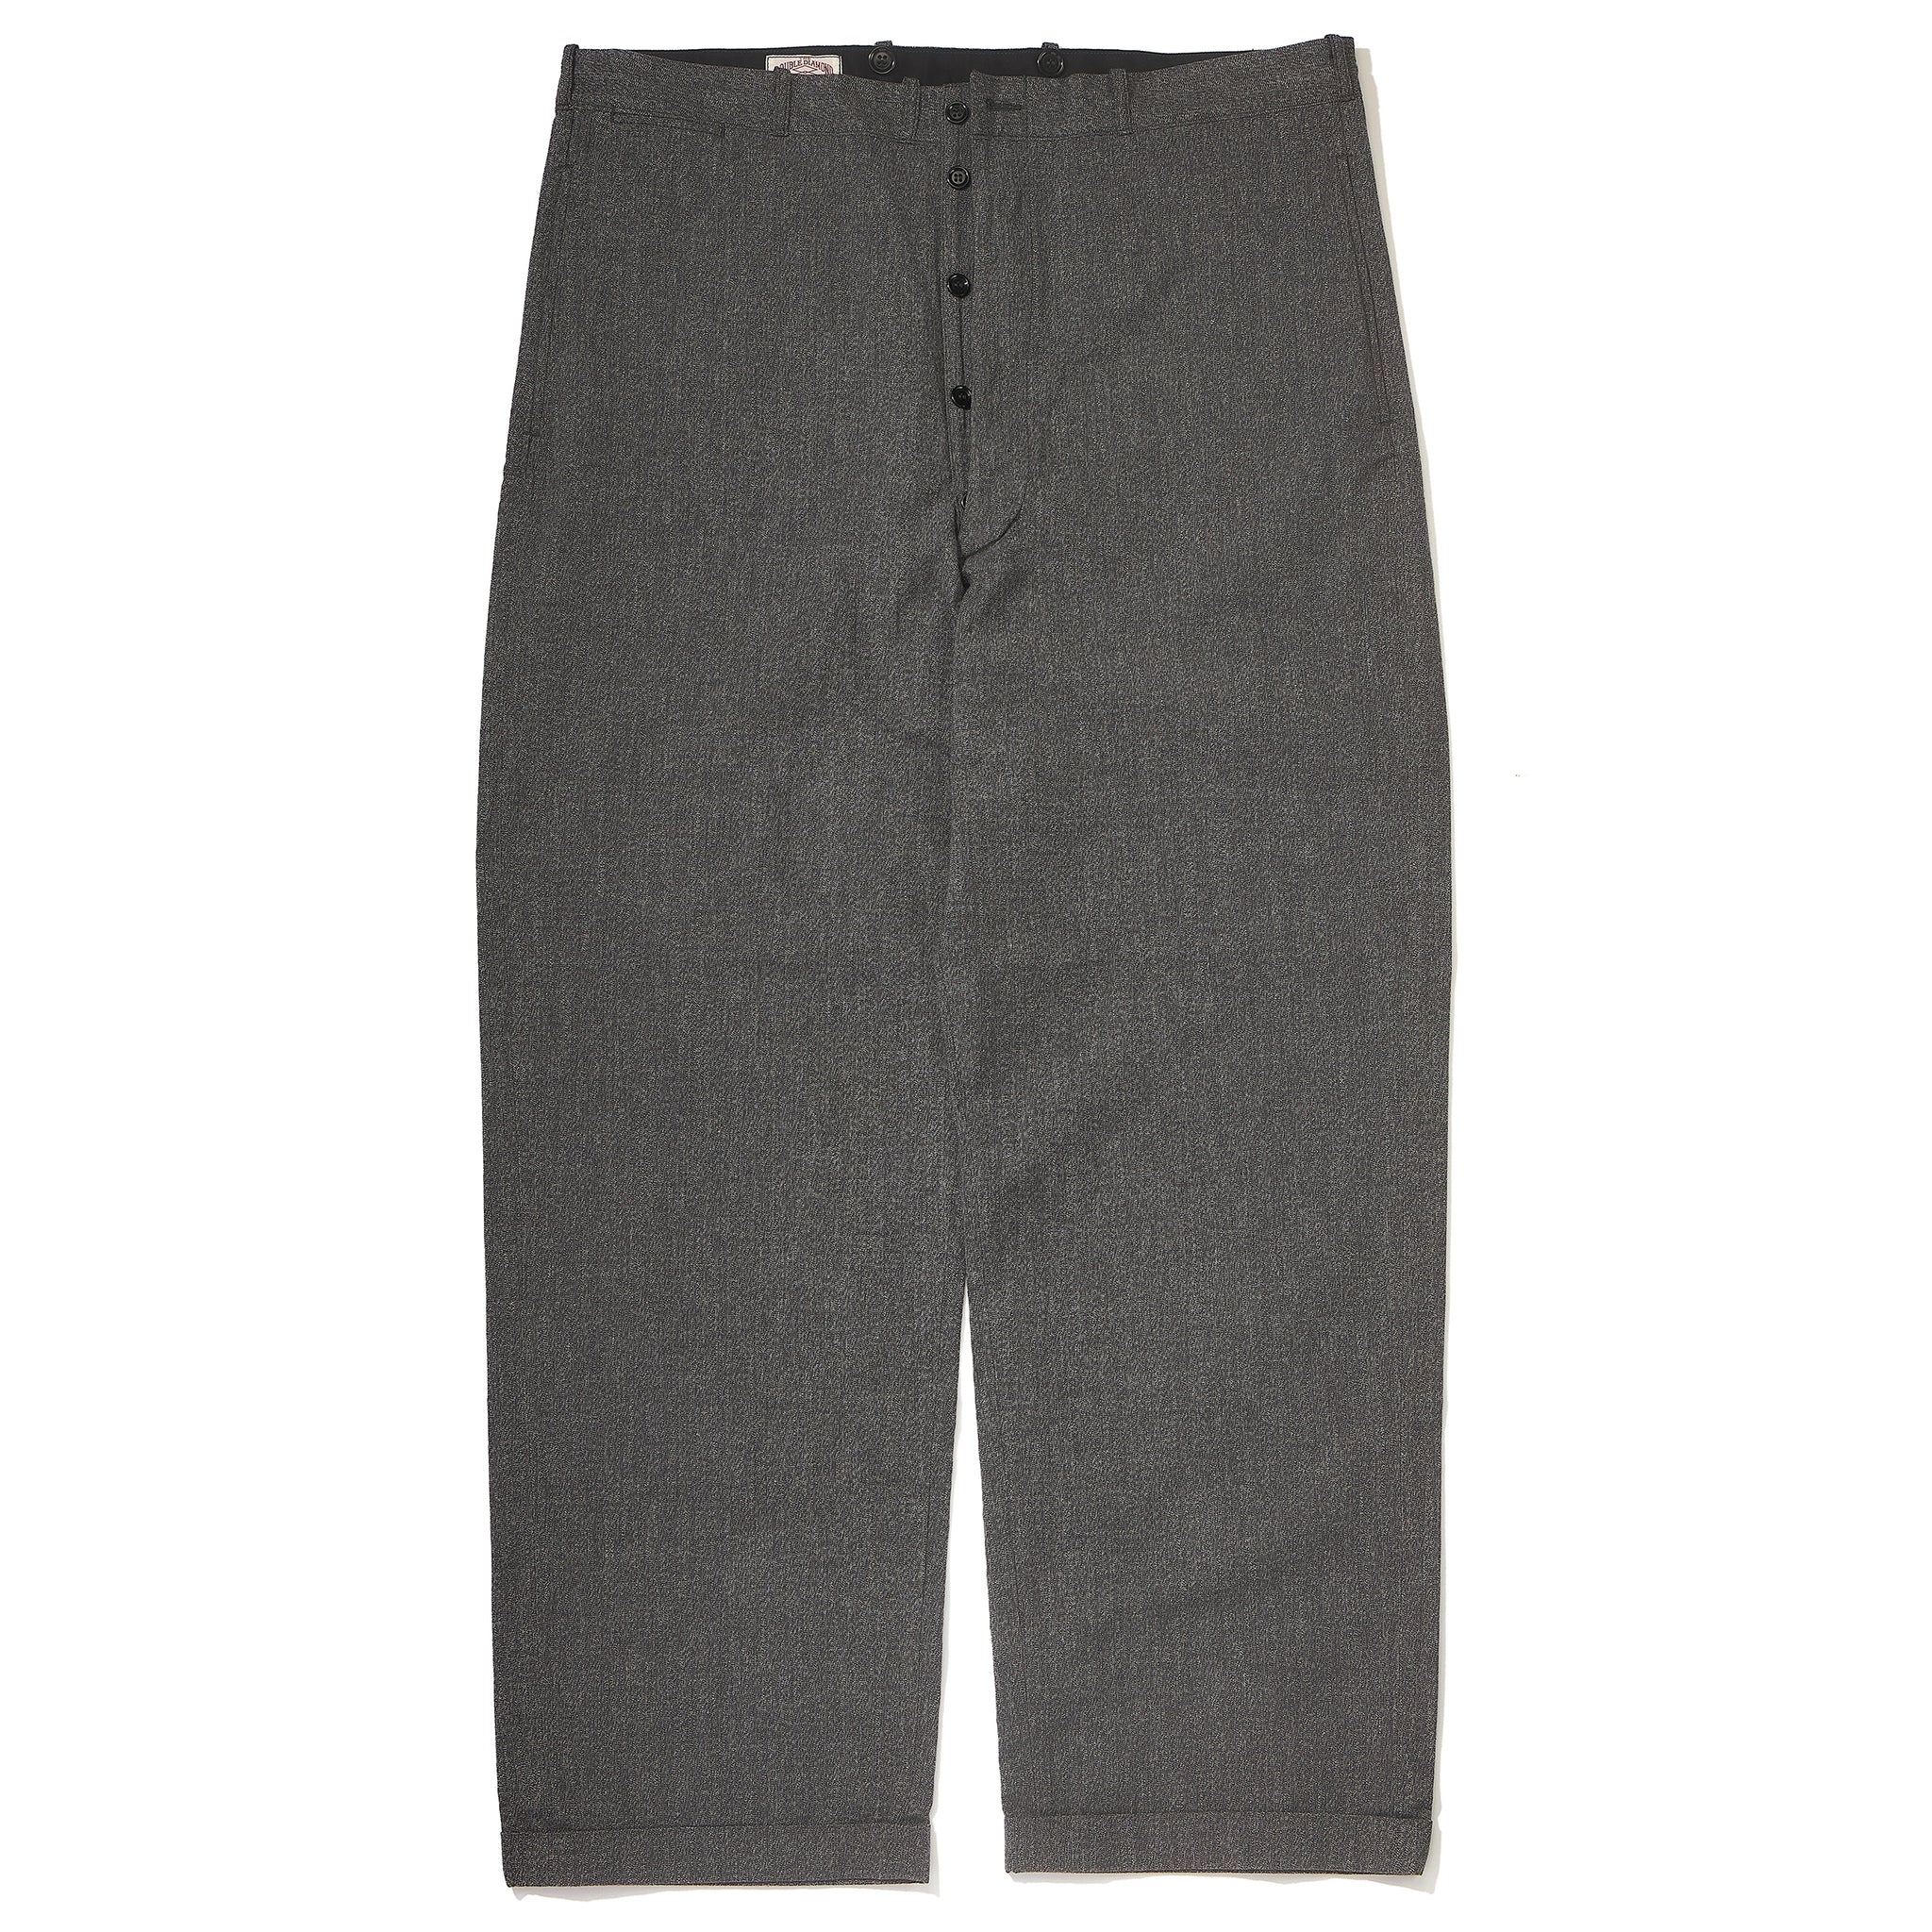 SALT AND PEPPER CHAMBRAY ATELIER TROUSERS